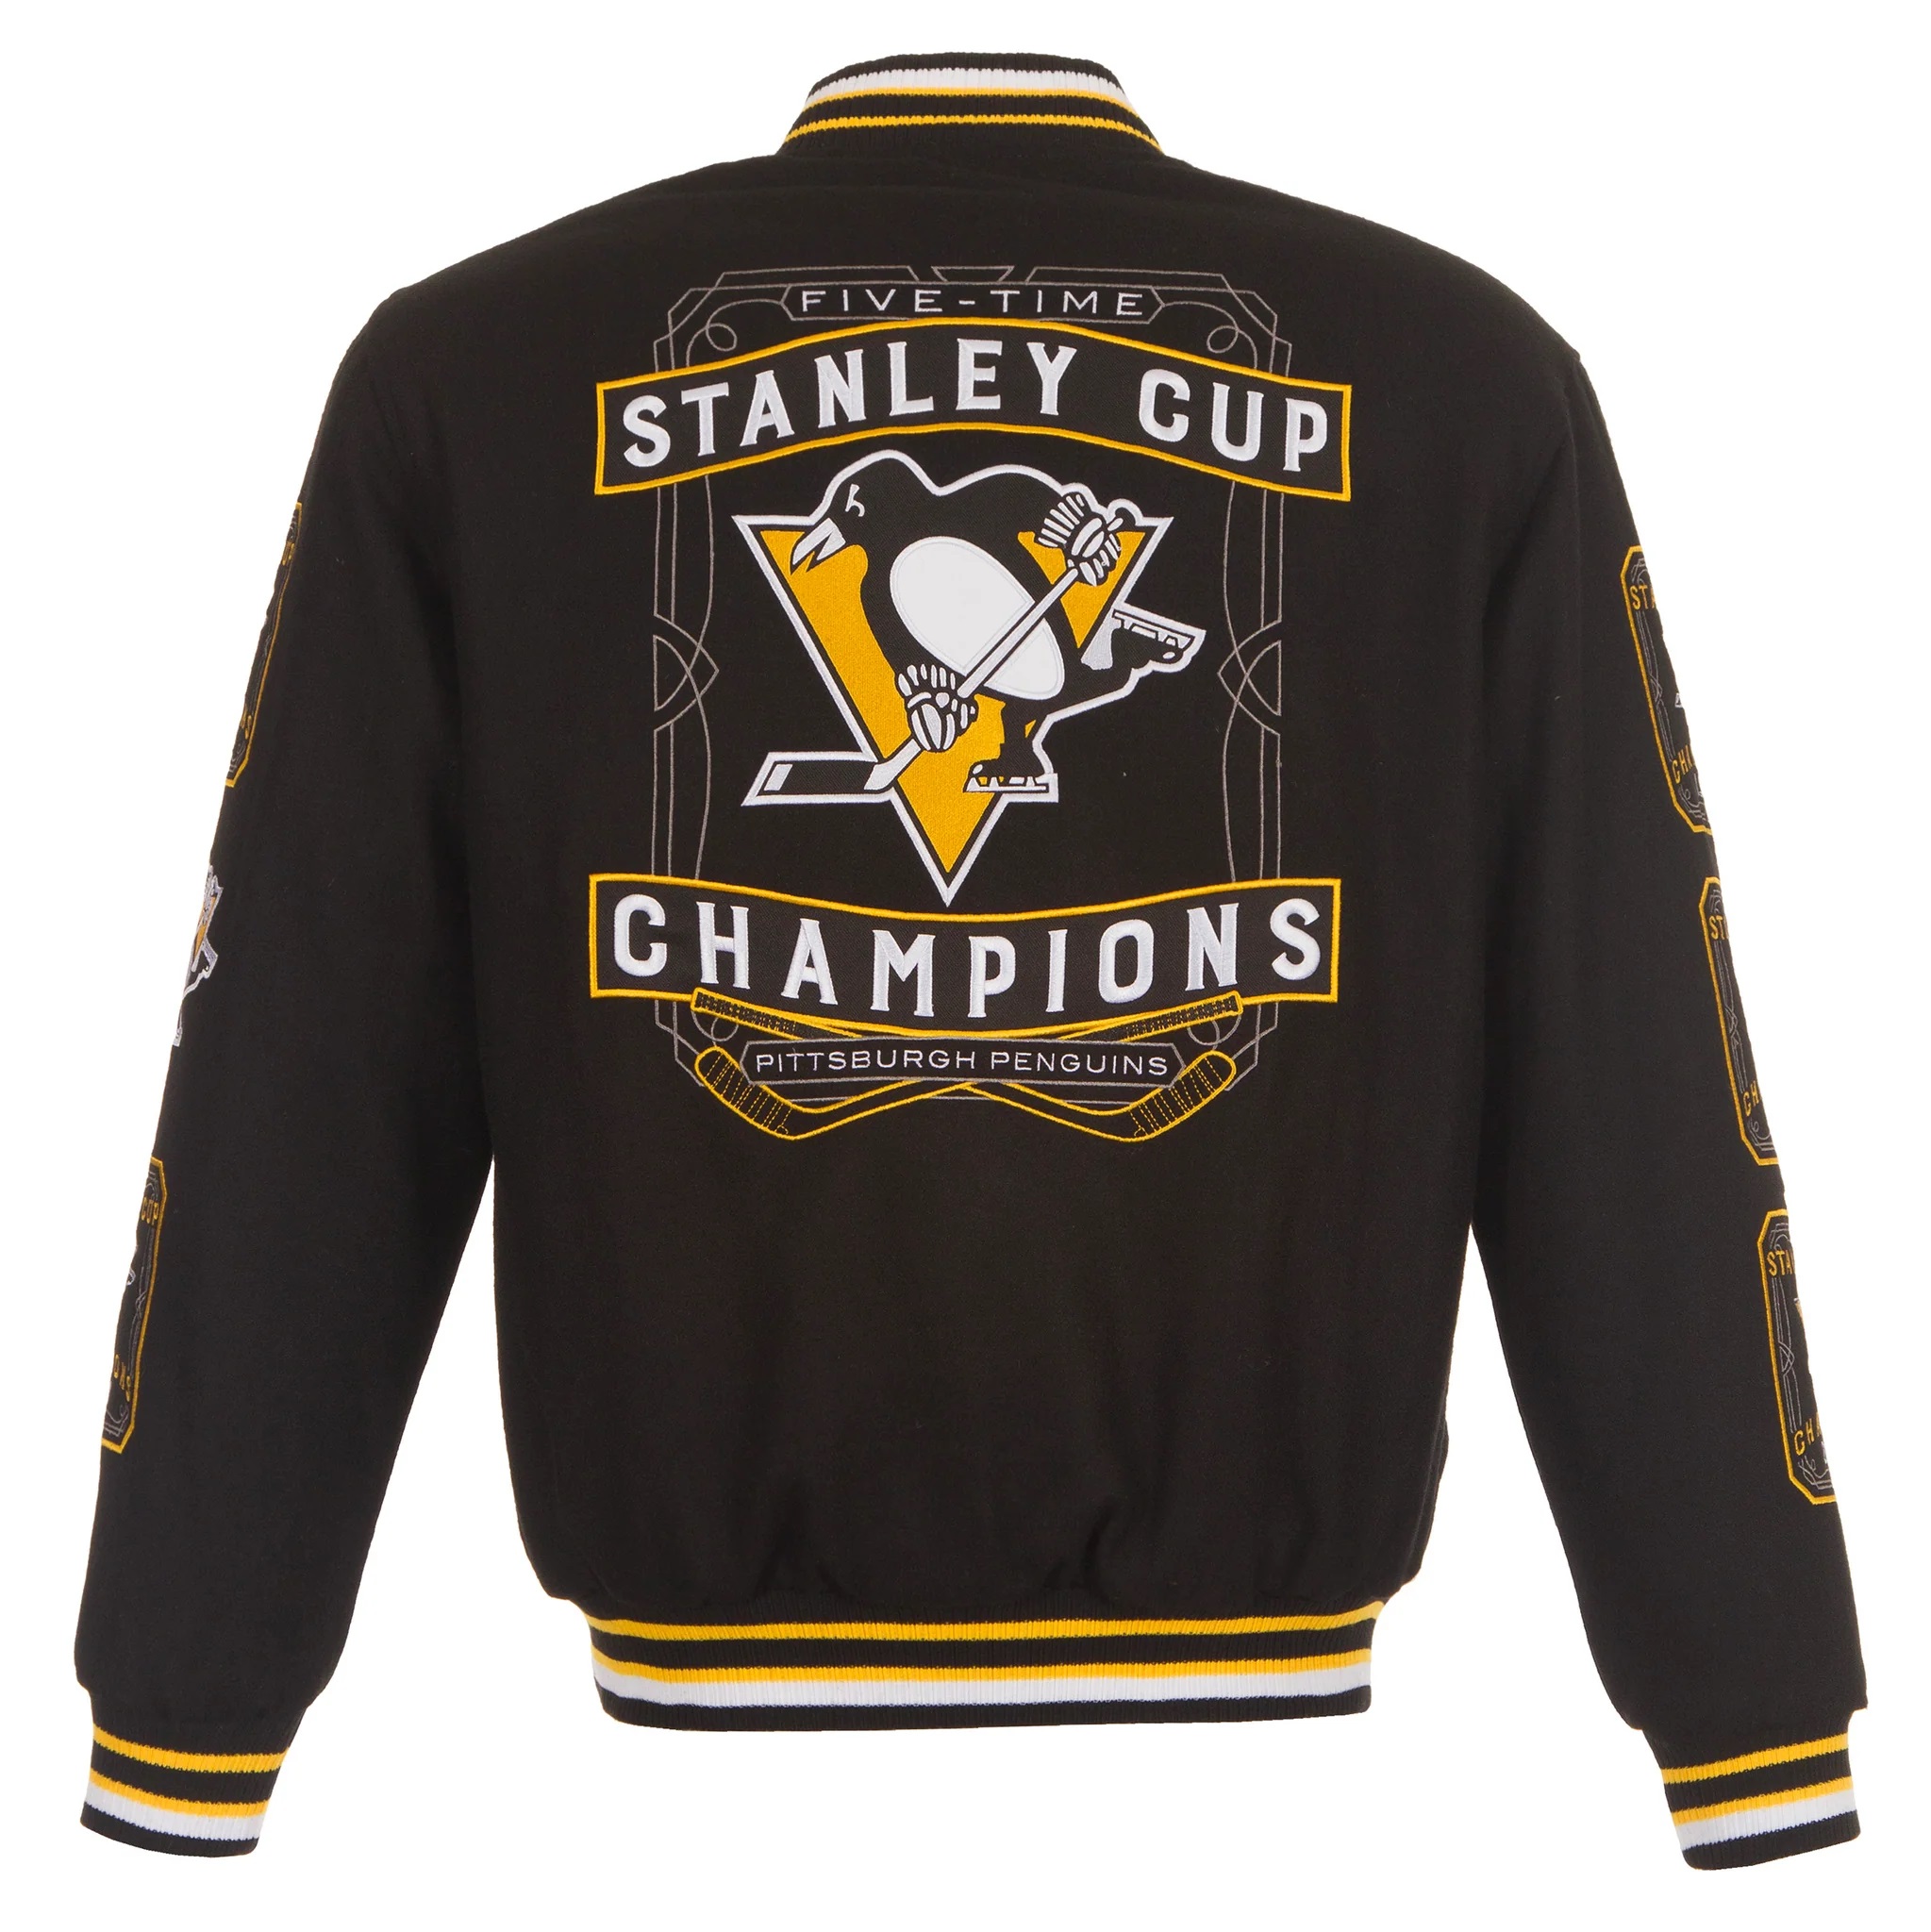 Pittsburgh Penguins 5-Time Stanley Cup Champions Jacket